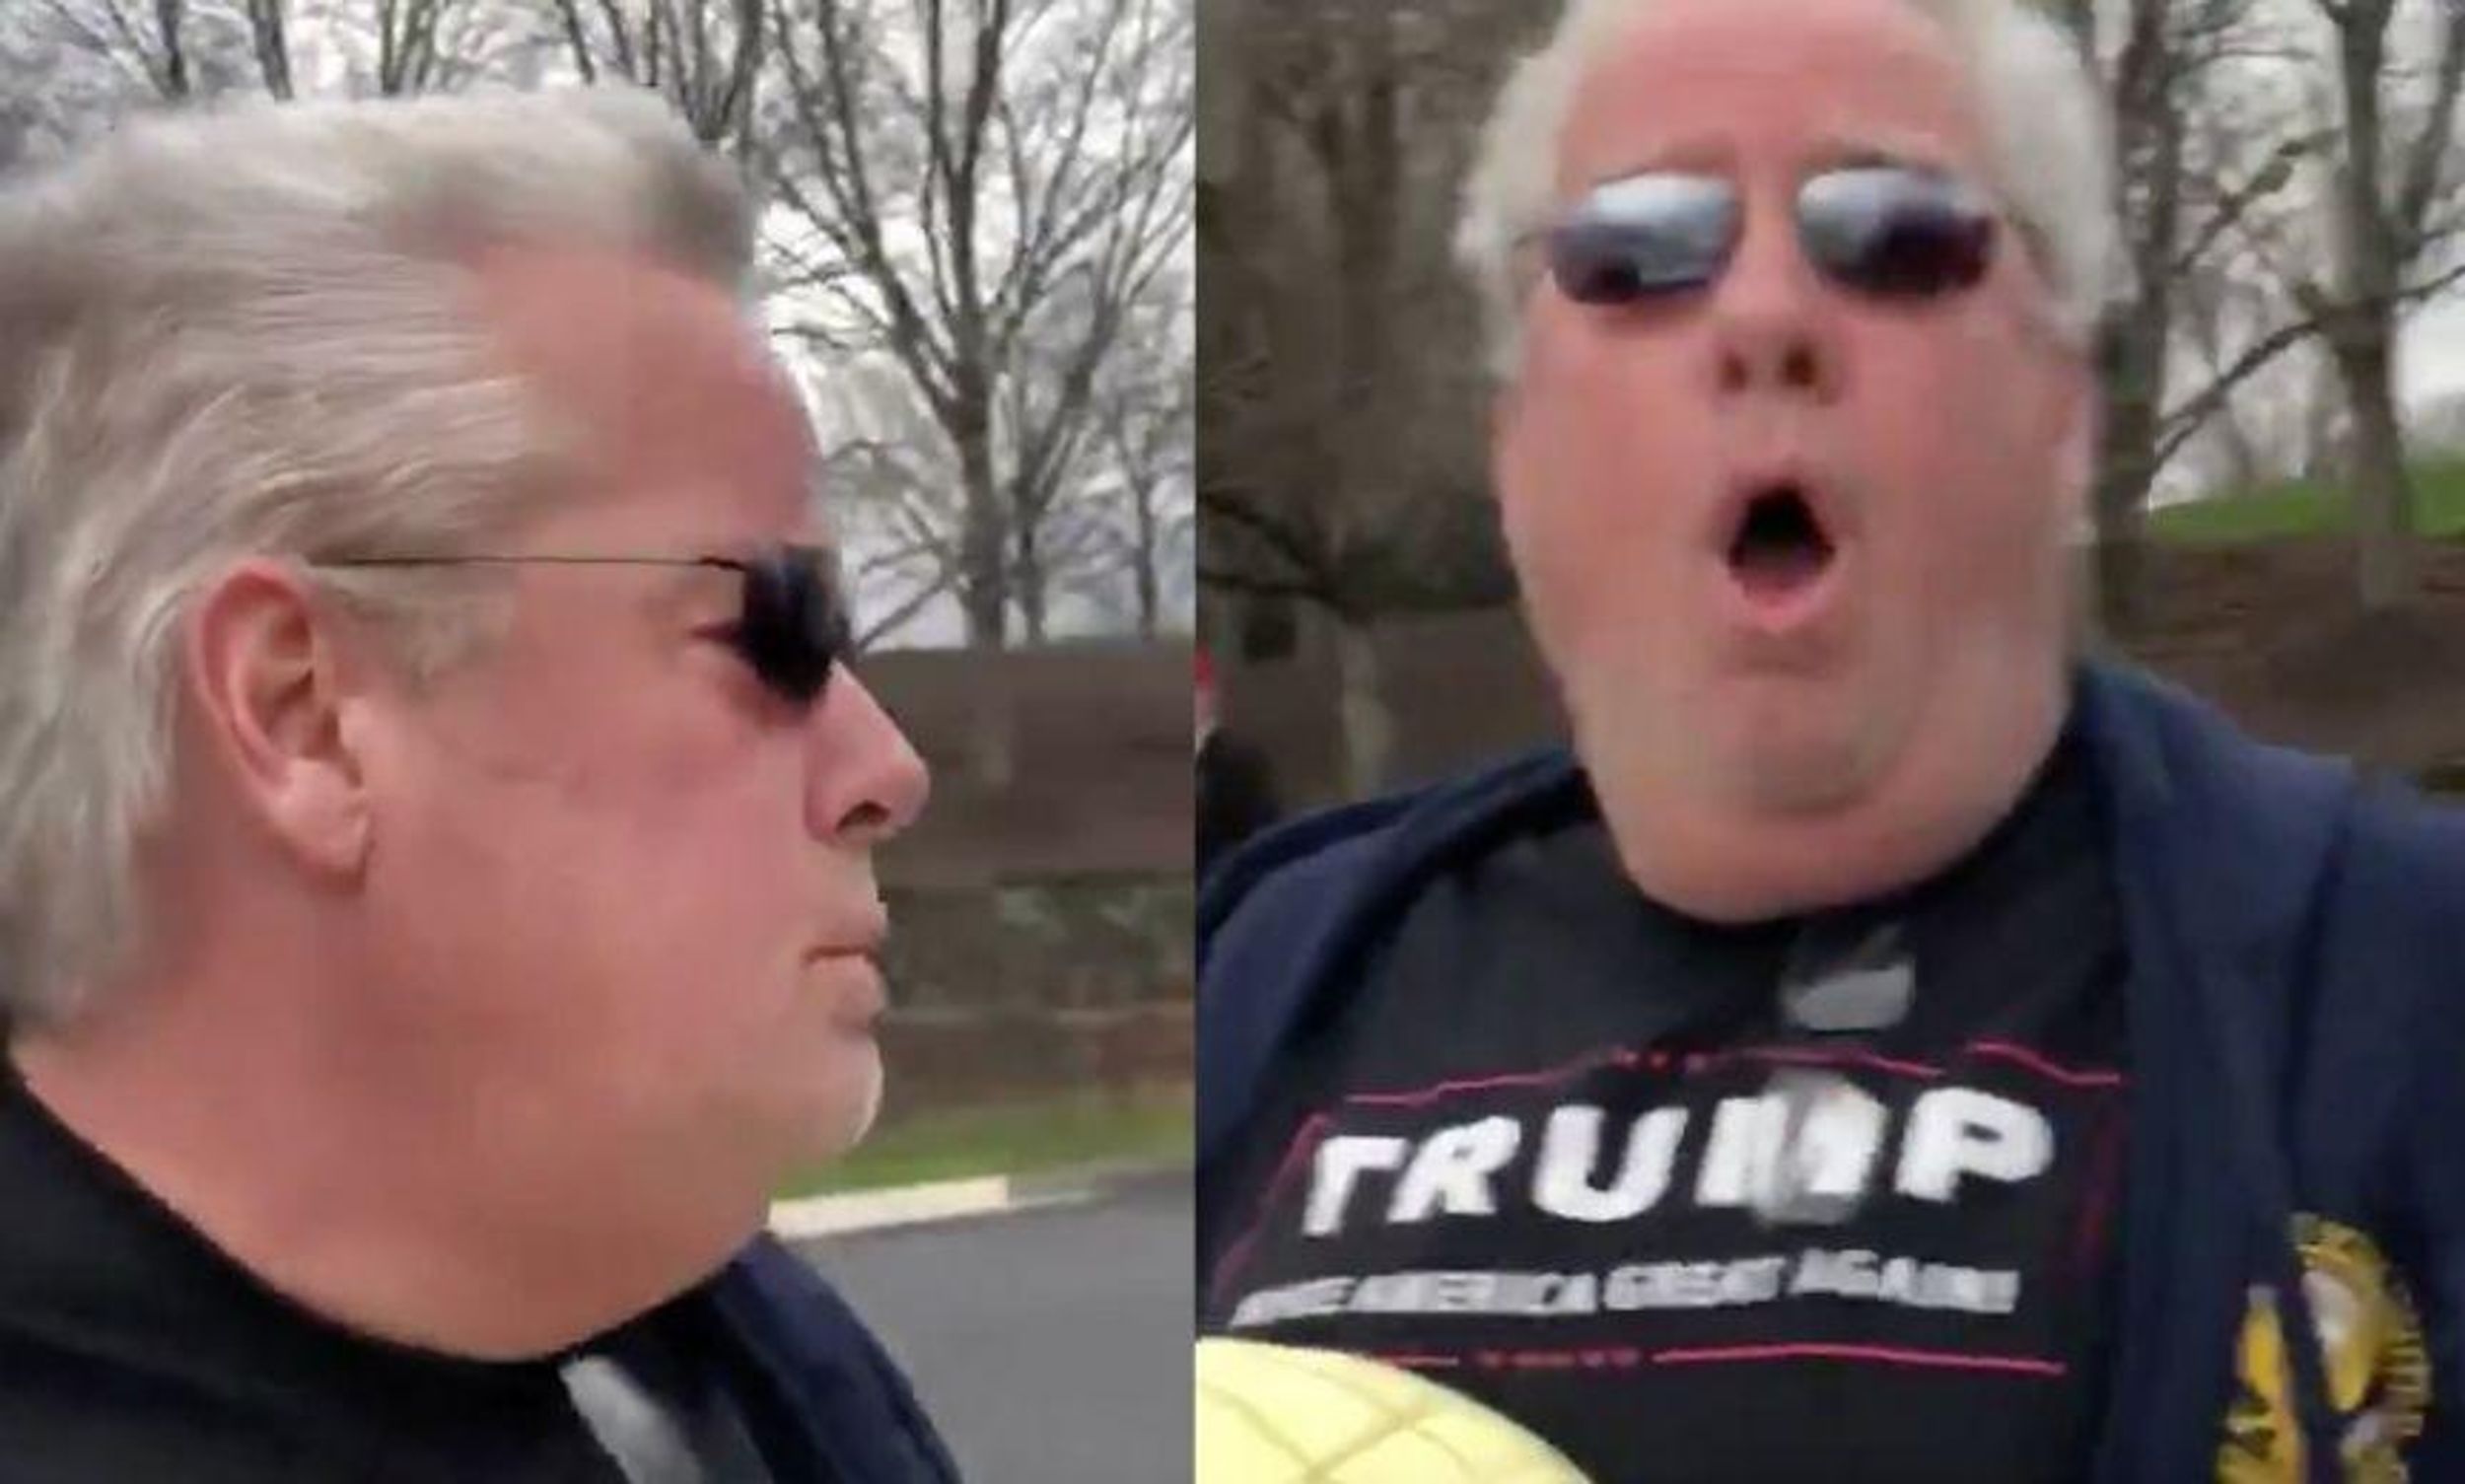 Maskless Trump Supporter Who Coughed on Protesters Donates $3k to NAACP Scholarship Fund as Punishment